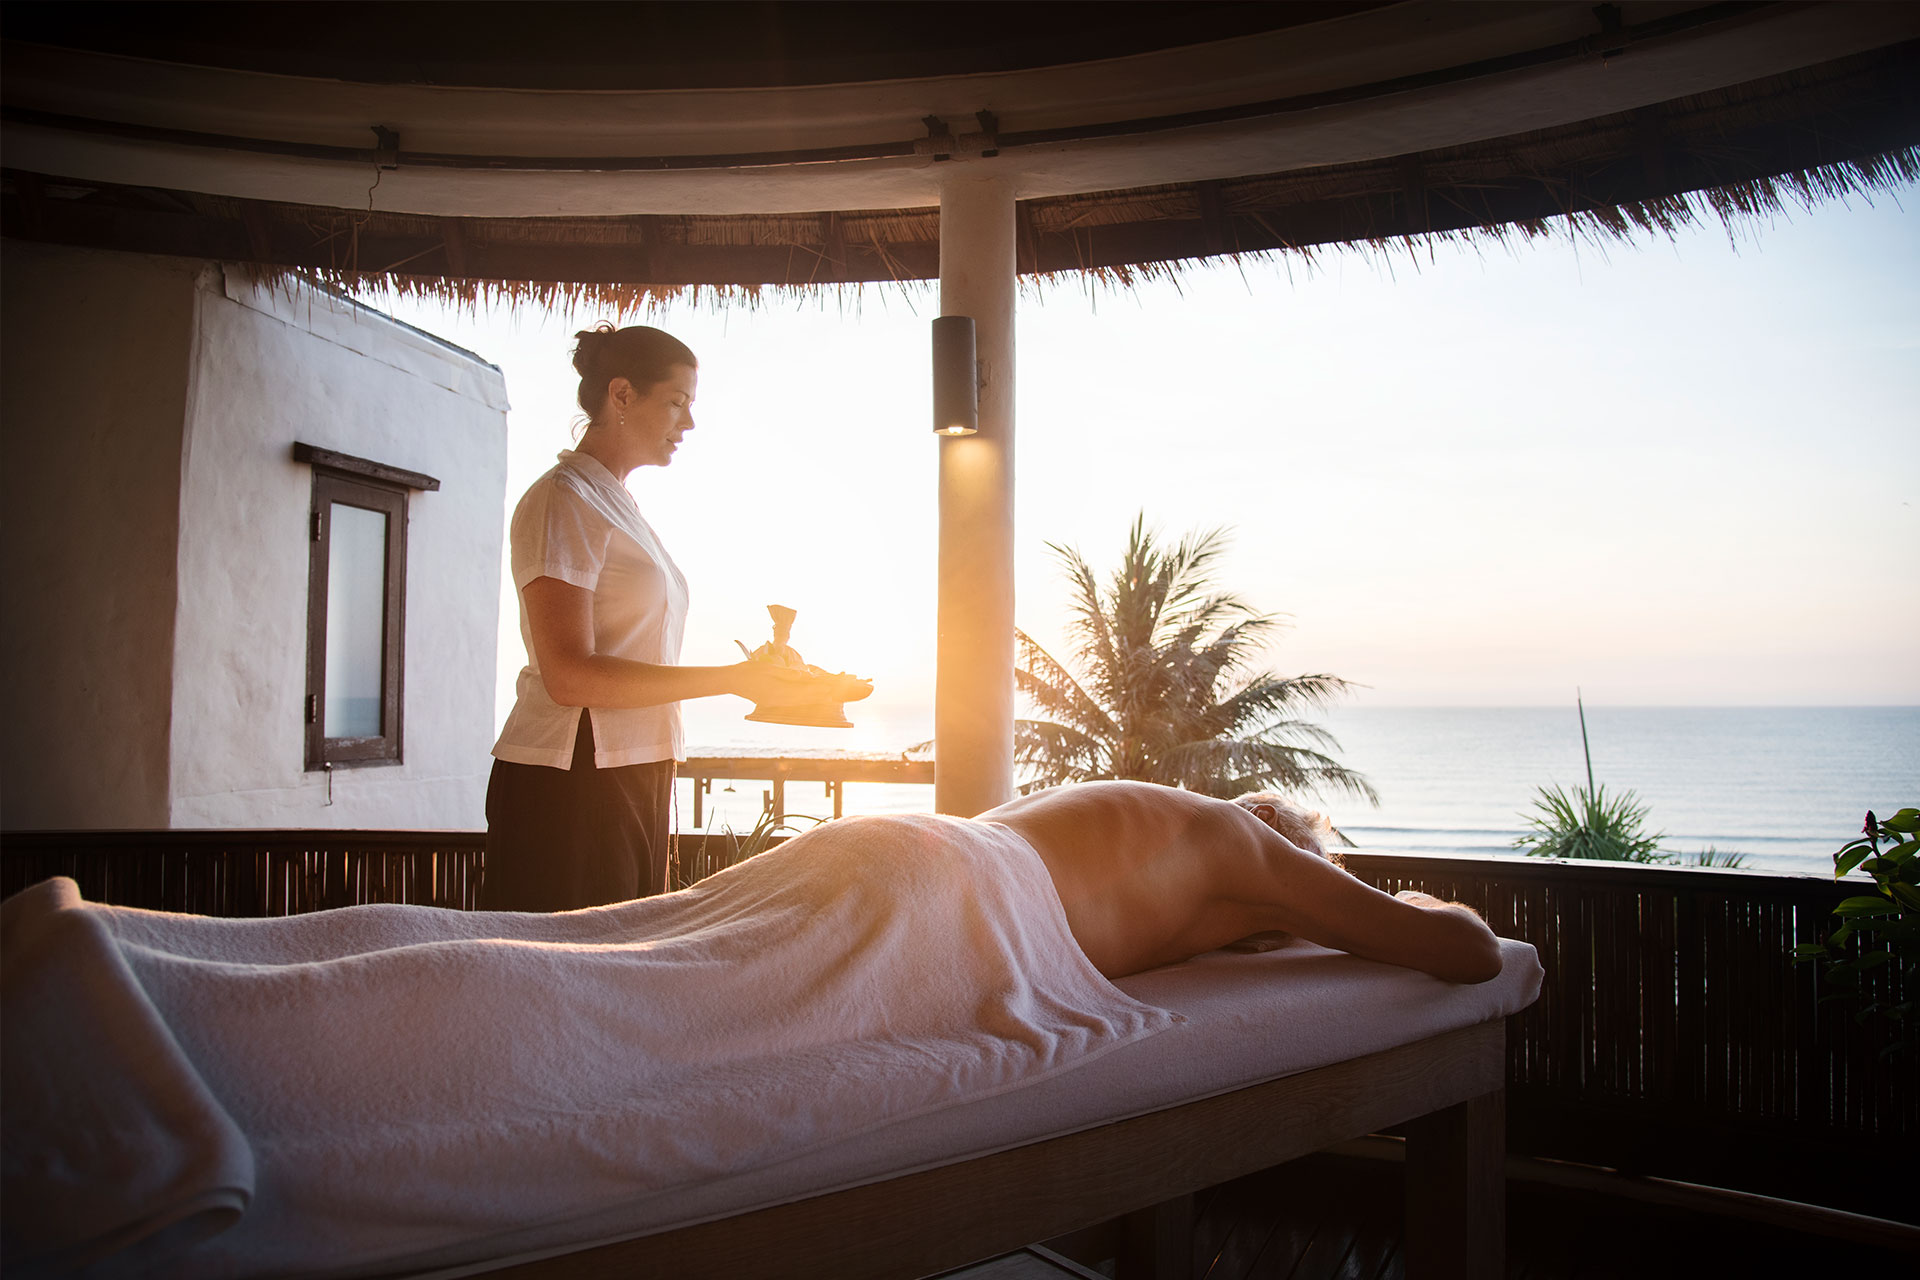 We give the best massage for you.